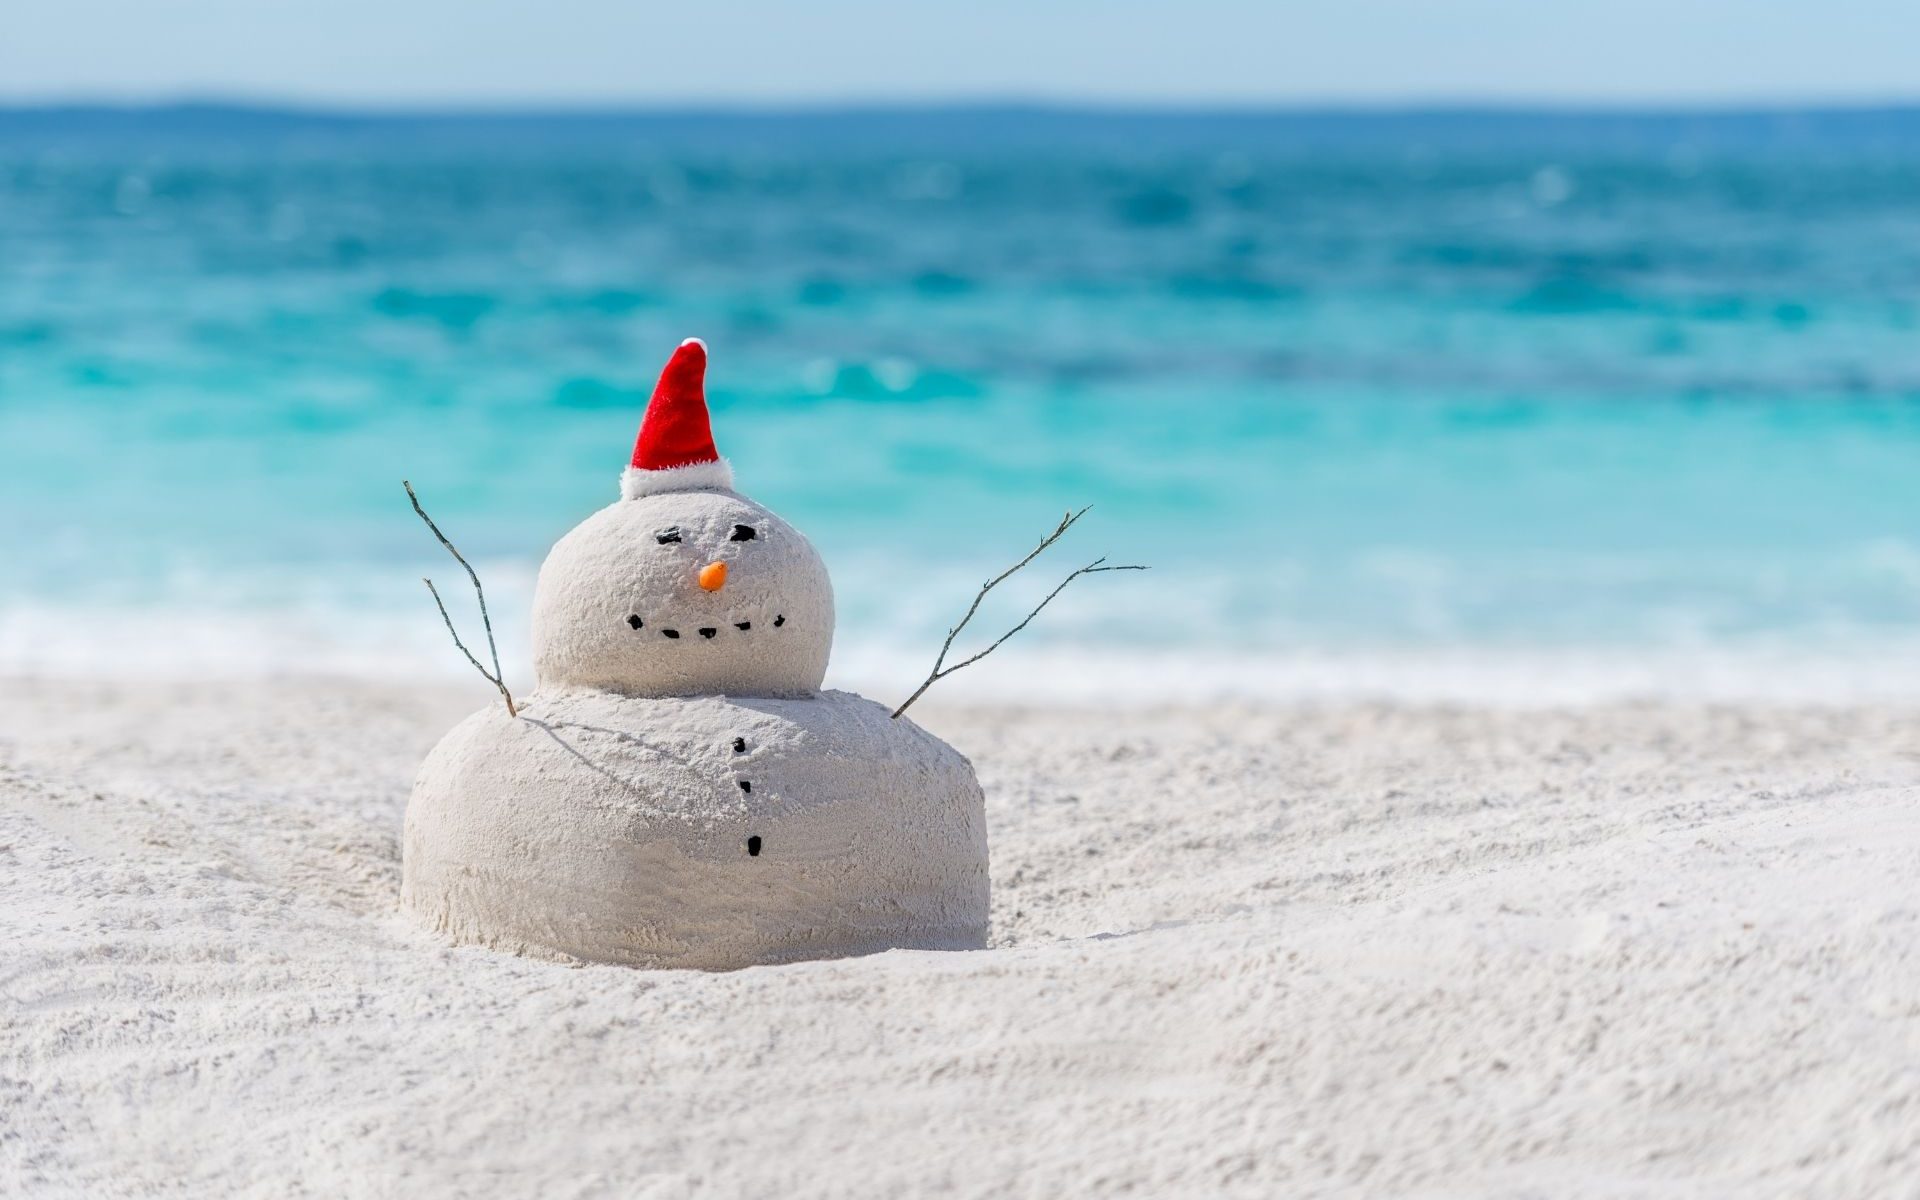 Snowman made from sand in a santa hat on the beach